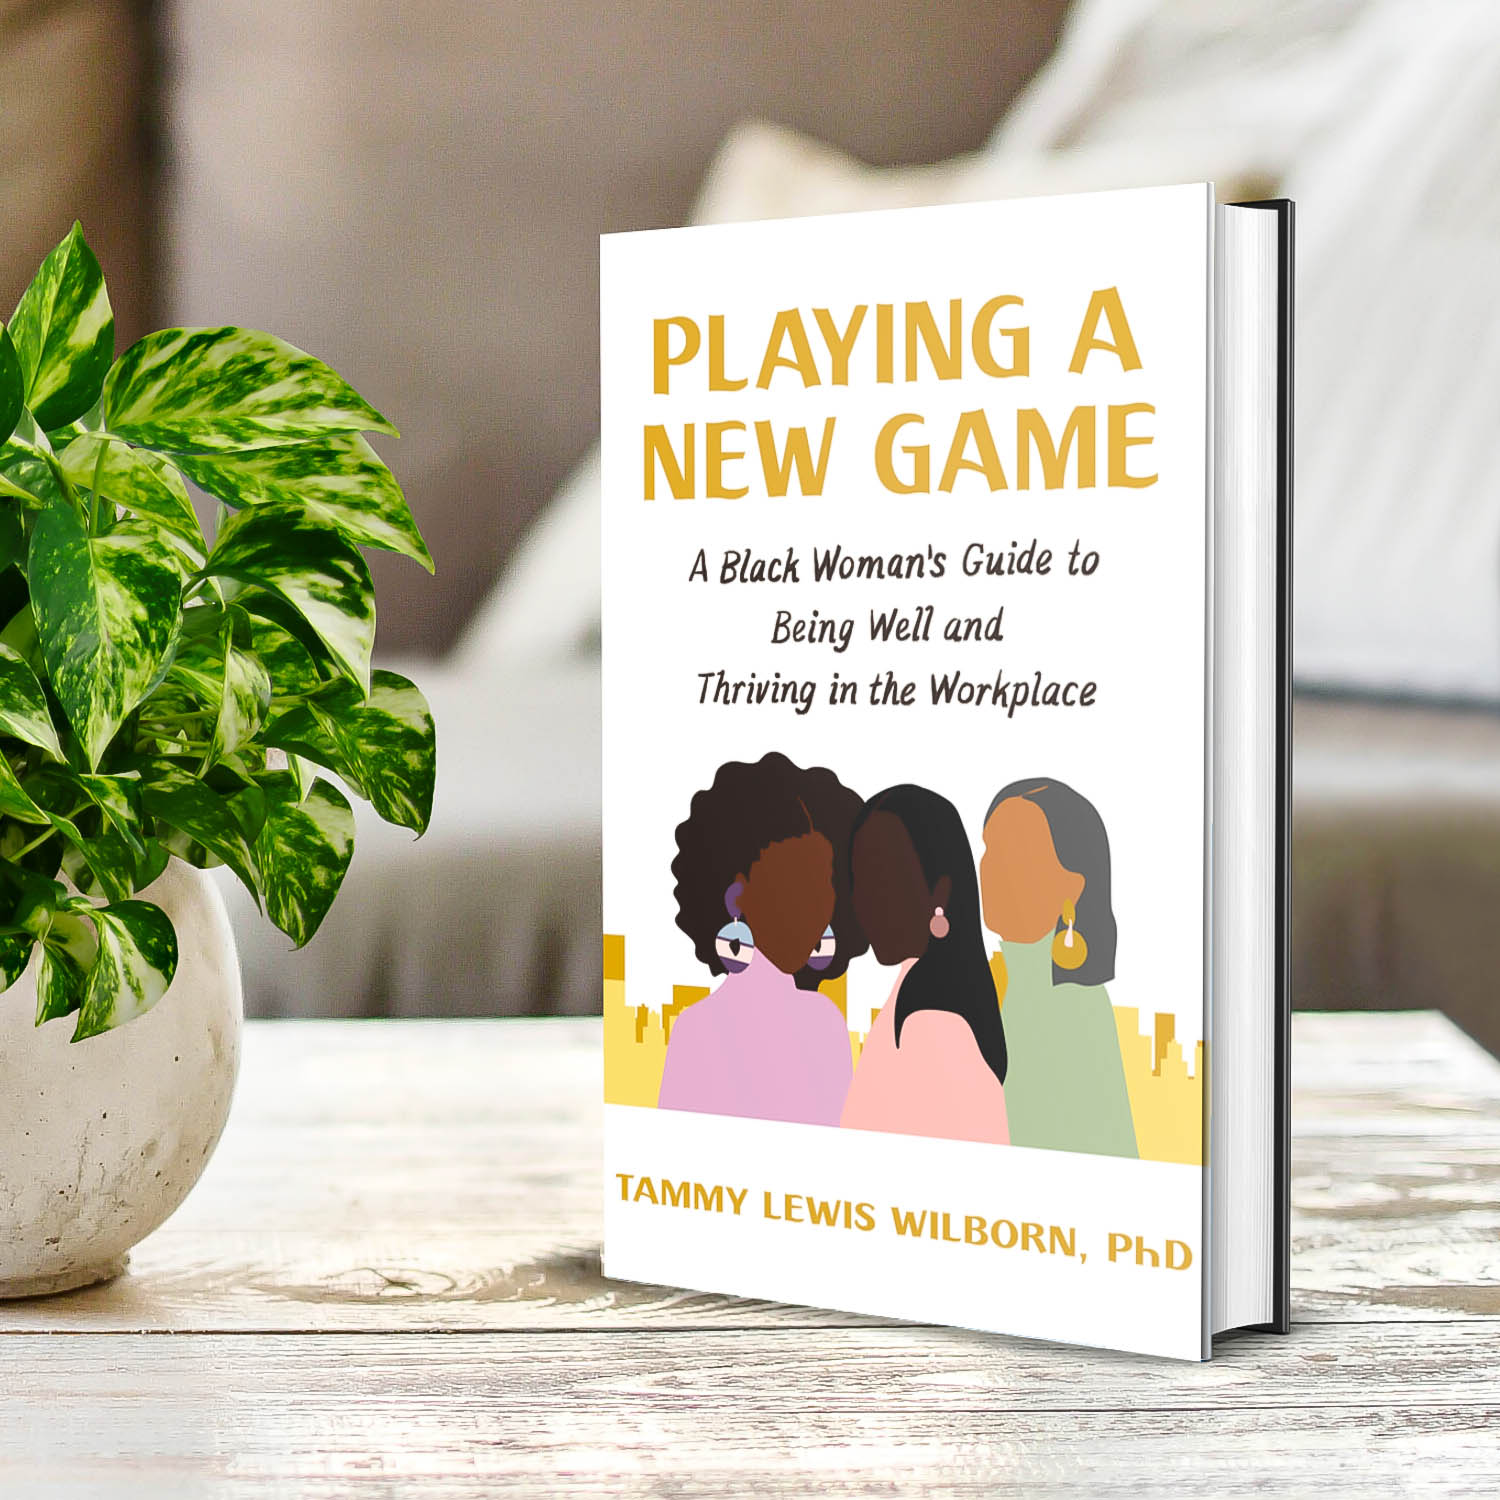 Playing A New Game: A Black Woman's Guide to Being Well and Thriving in the Workplace